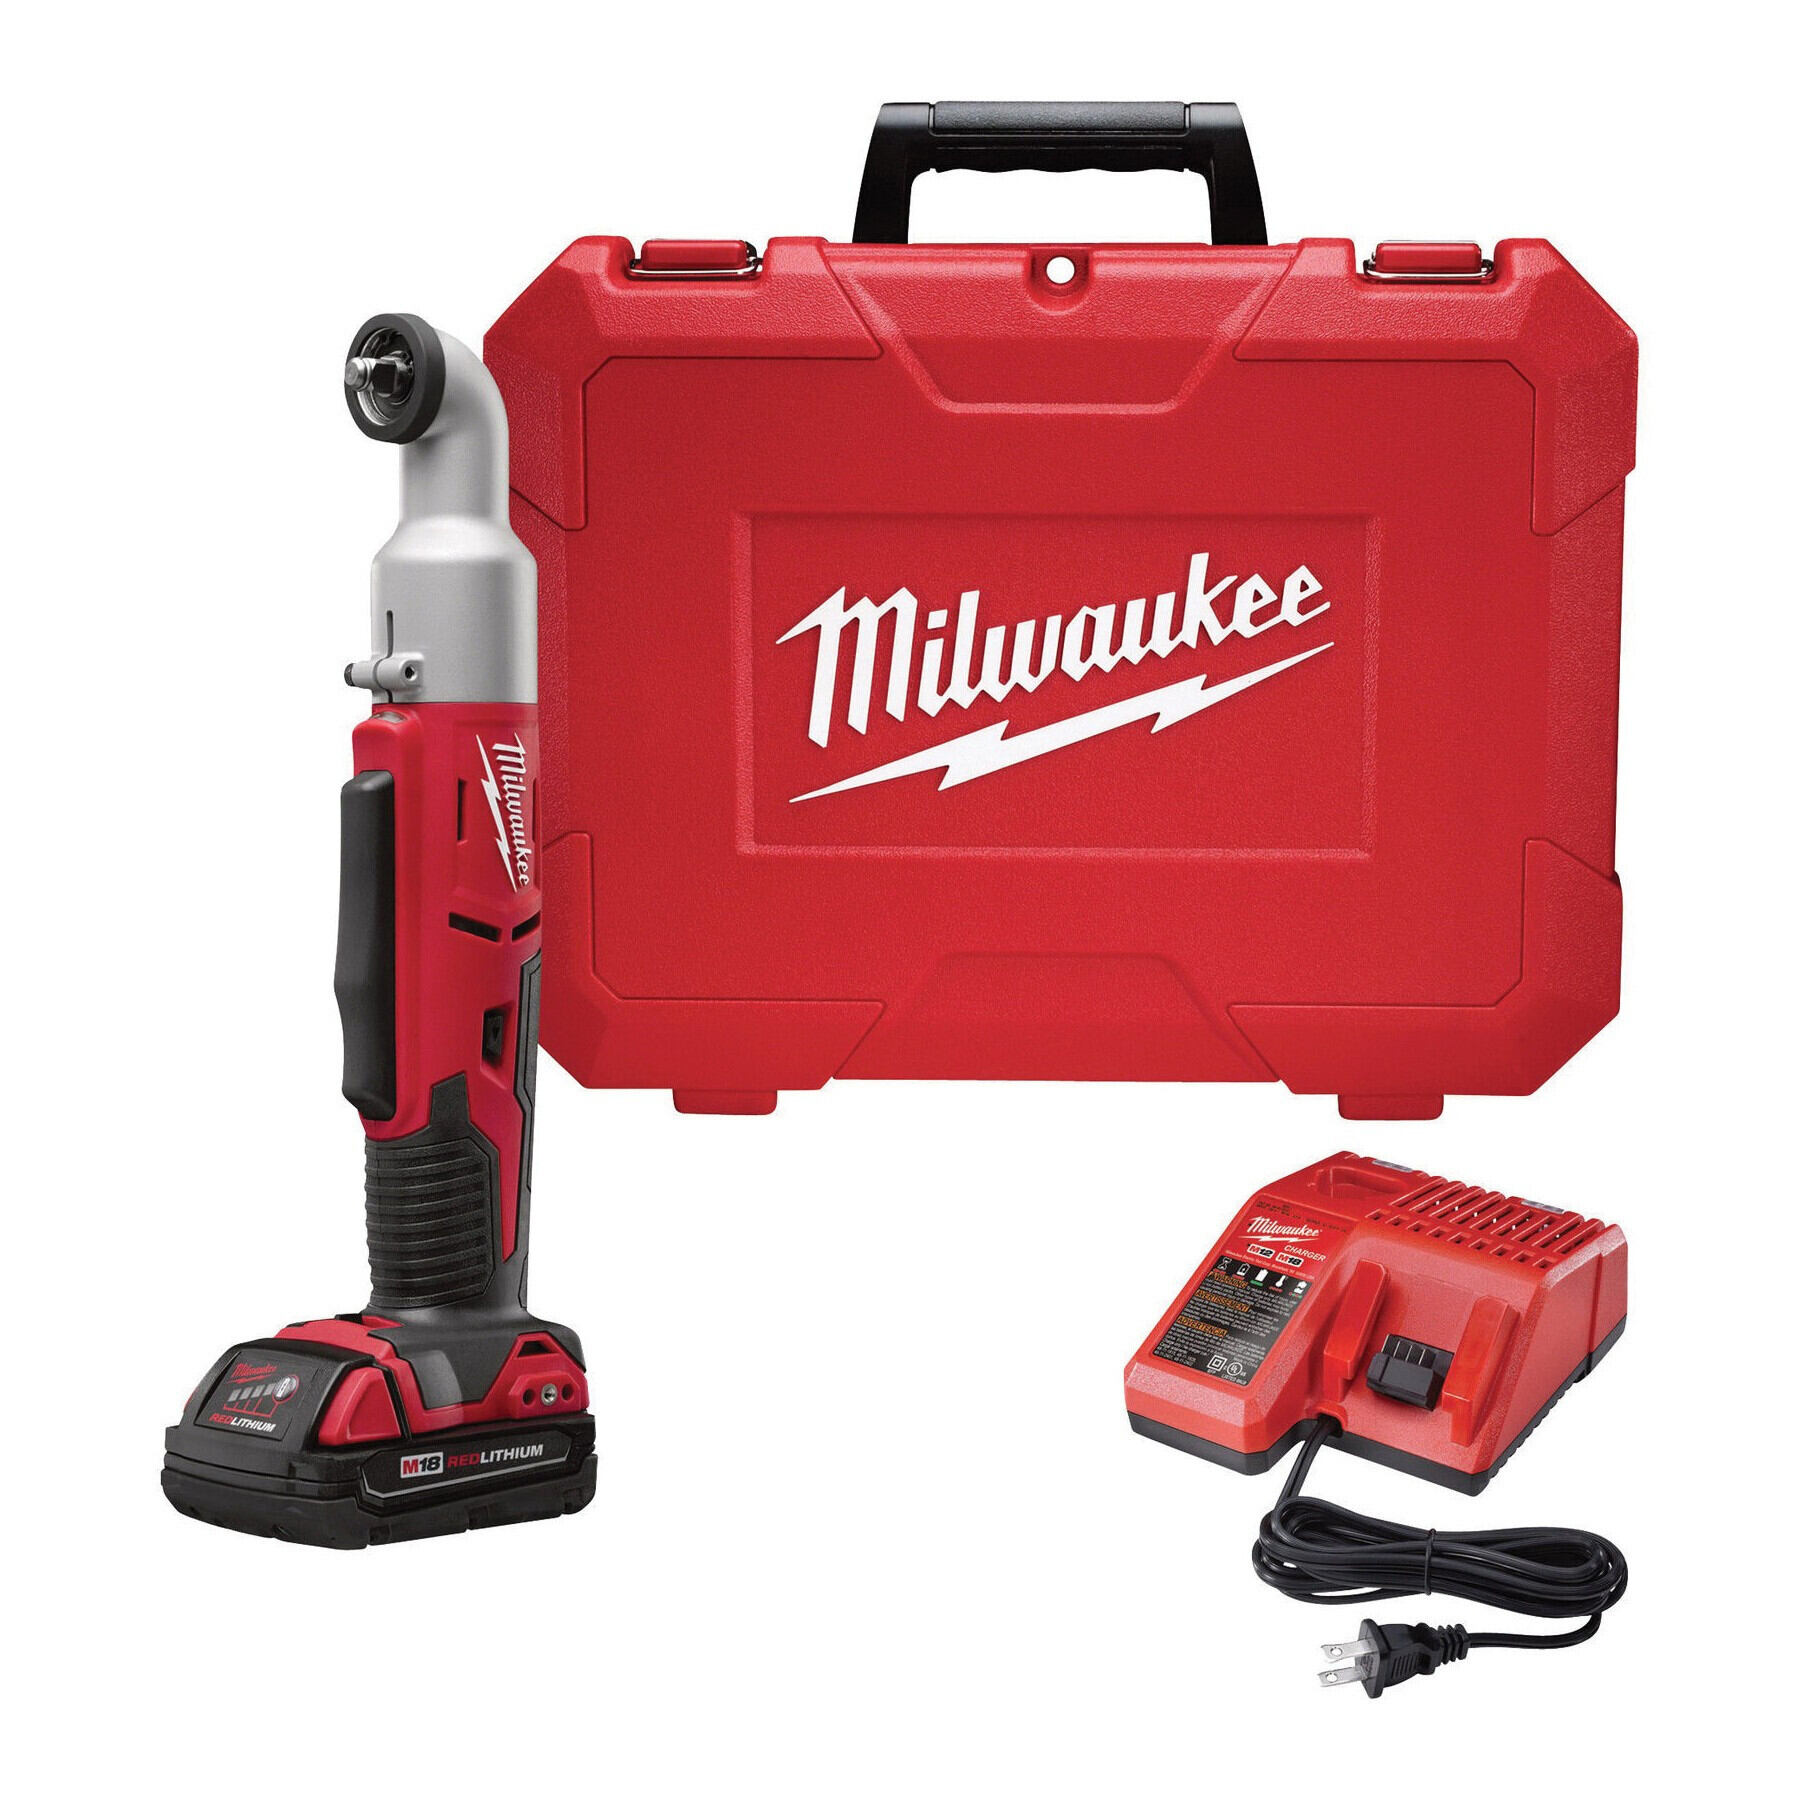 M18 FUEL™ SDS Plus Rotary Hammer with Dedicated Dust Extractor Kit